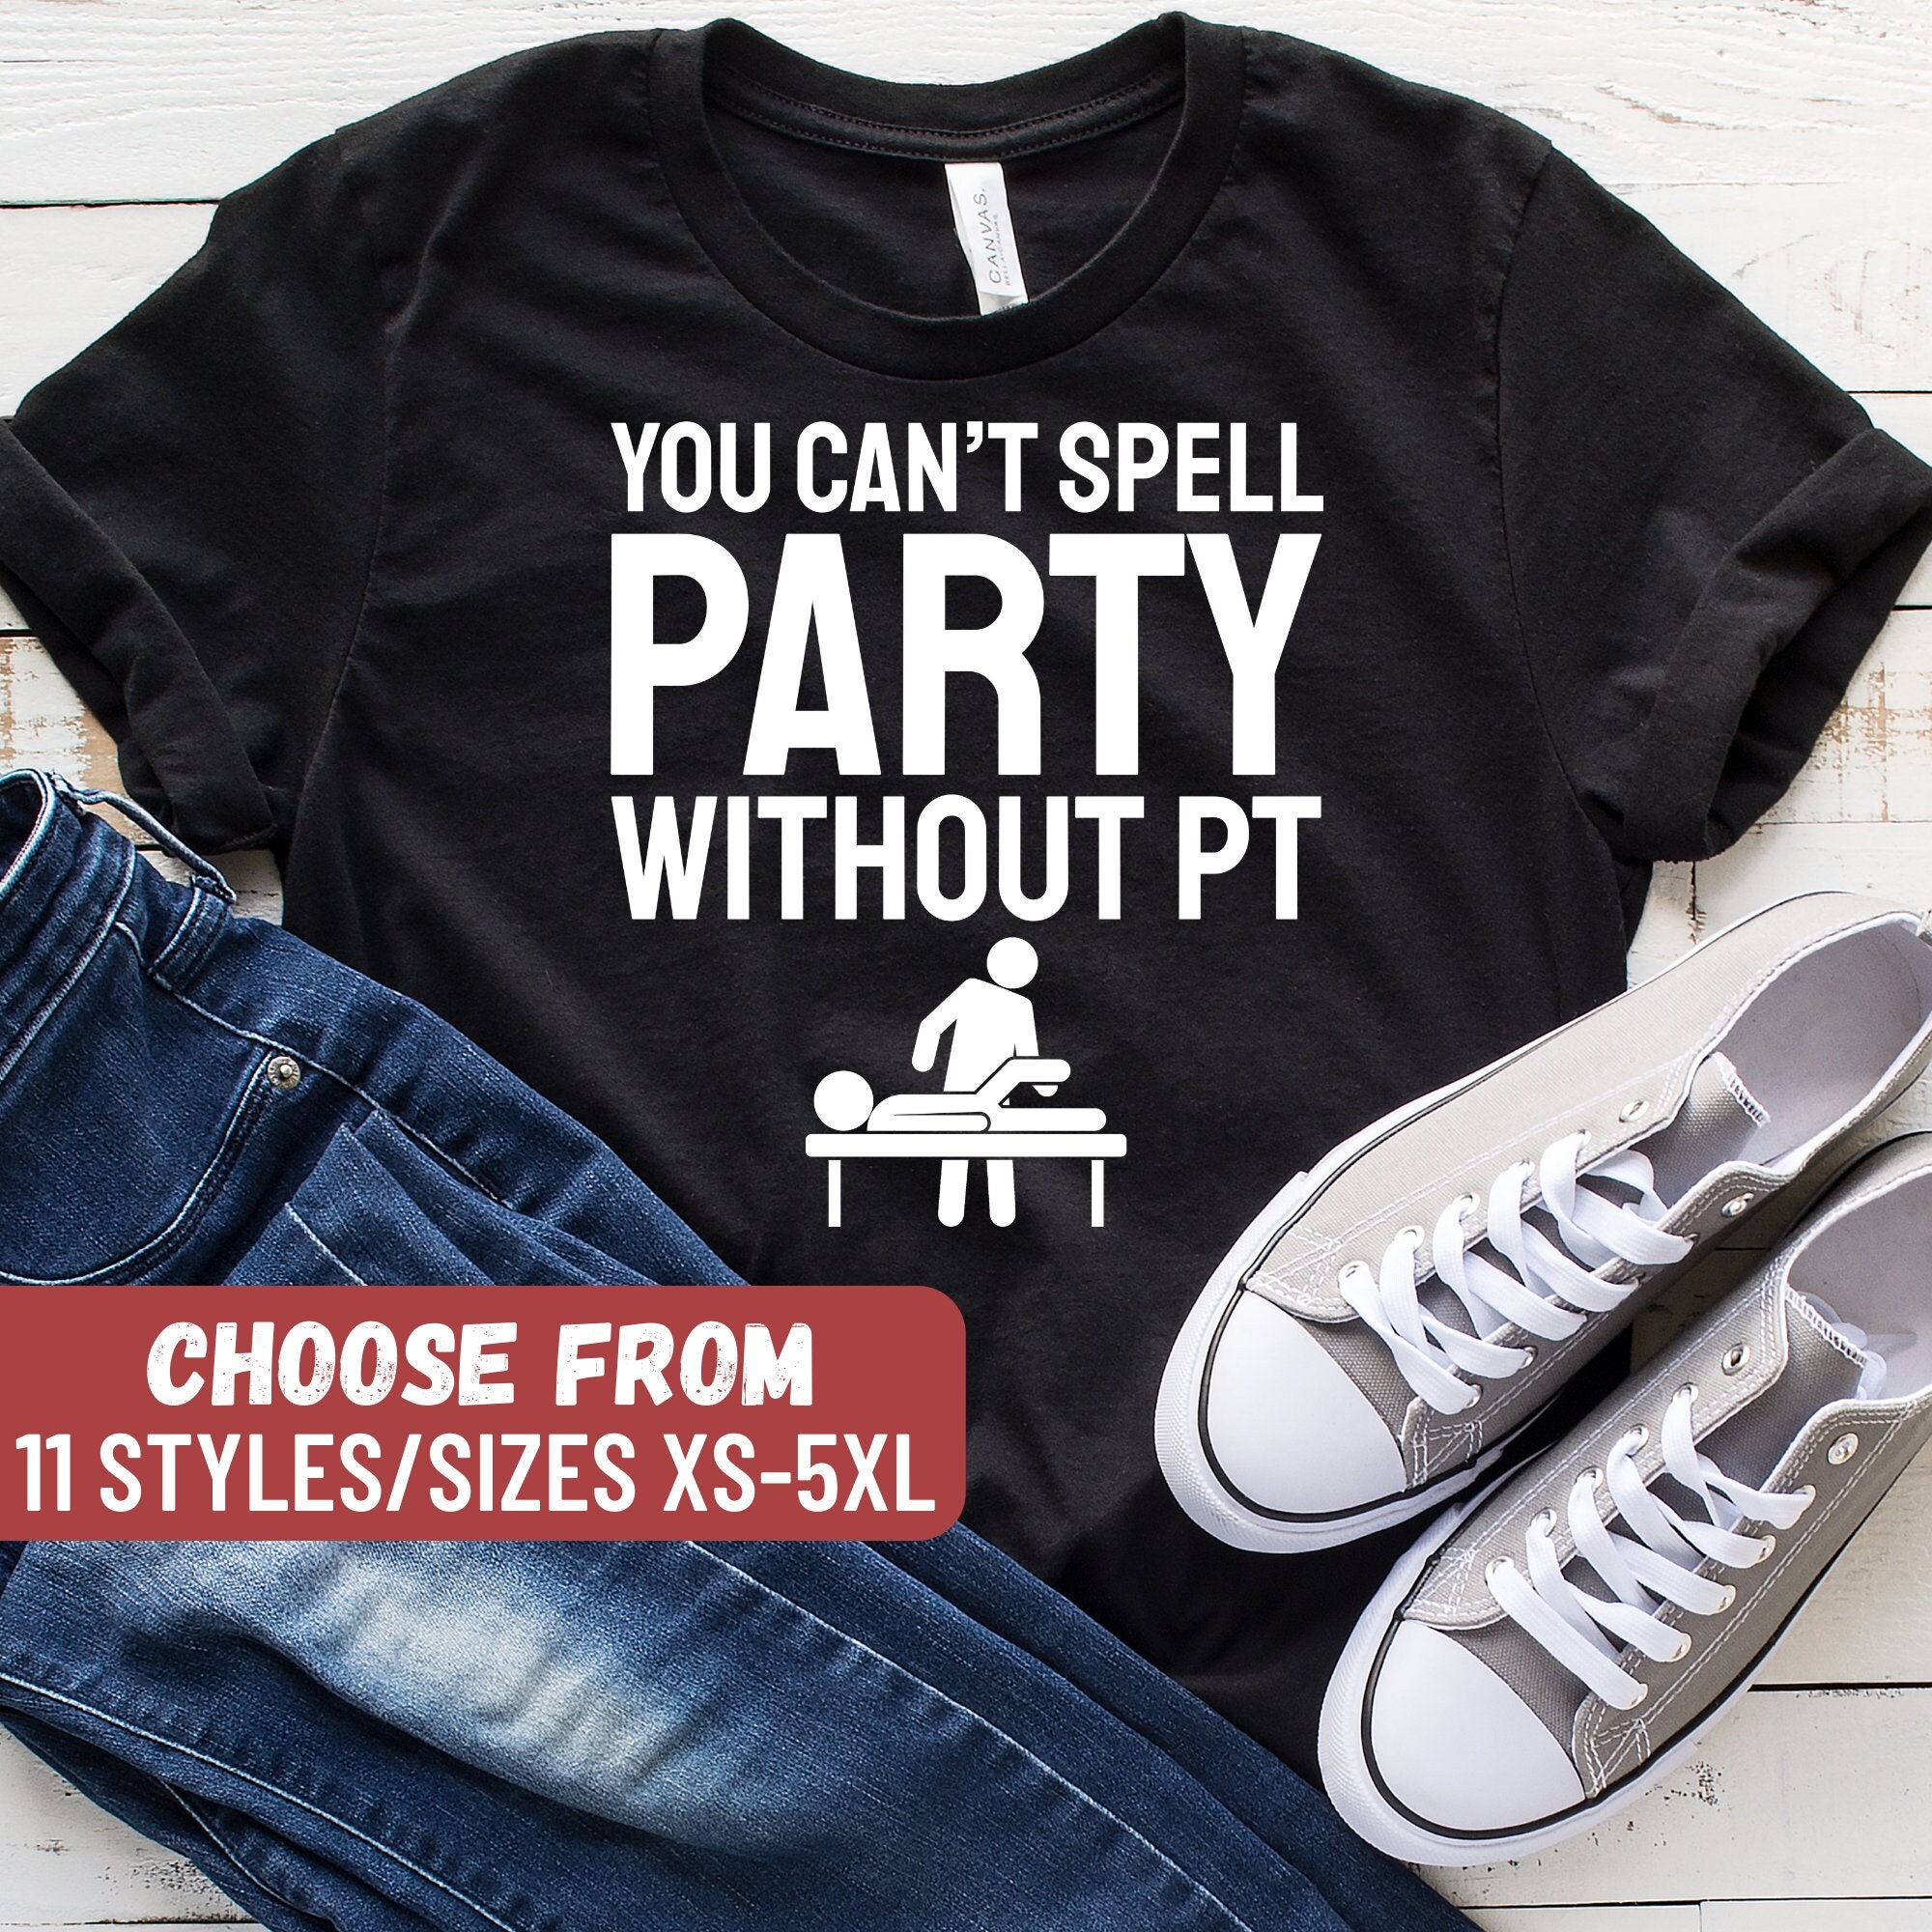 You Can't Spell Party Without PT - Physical Therapy - Sticker